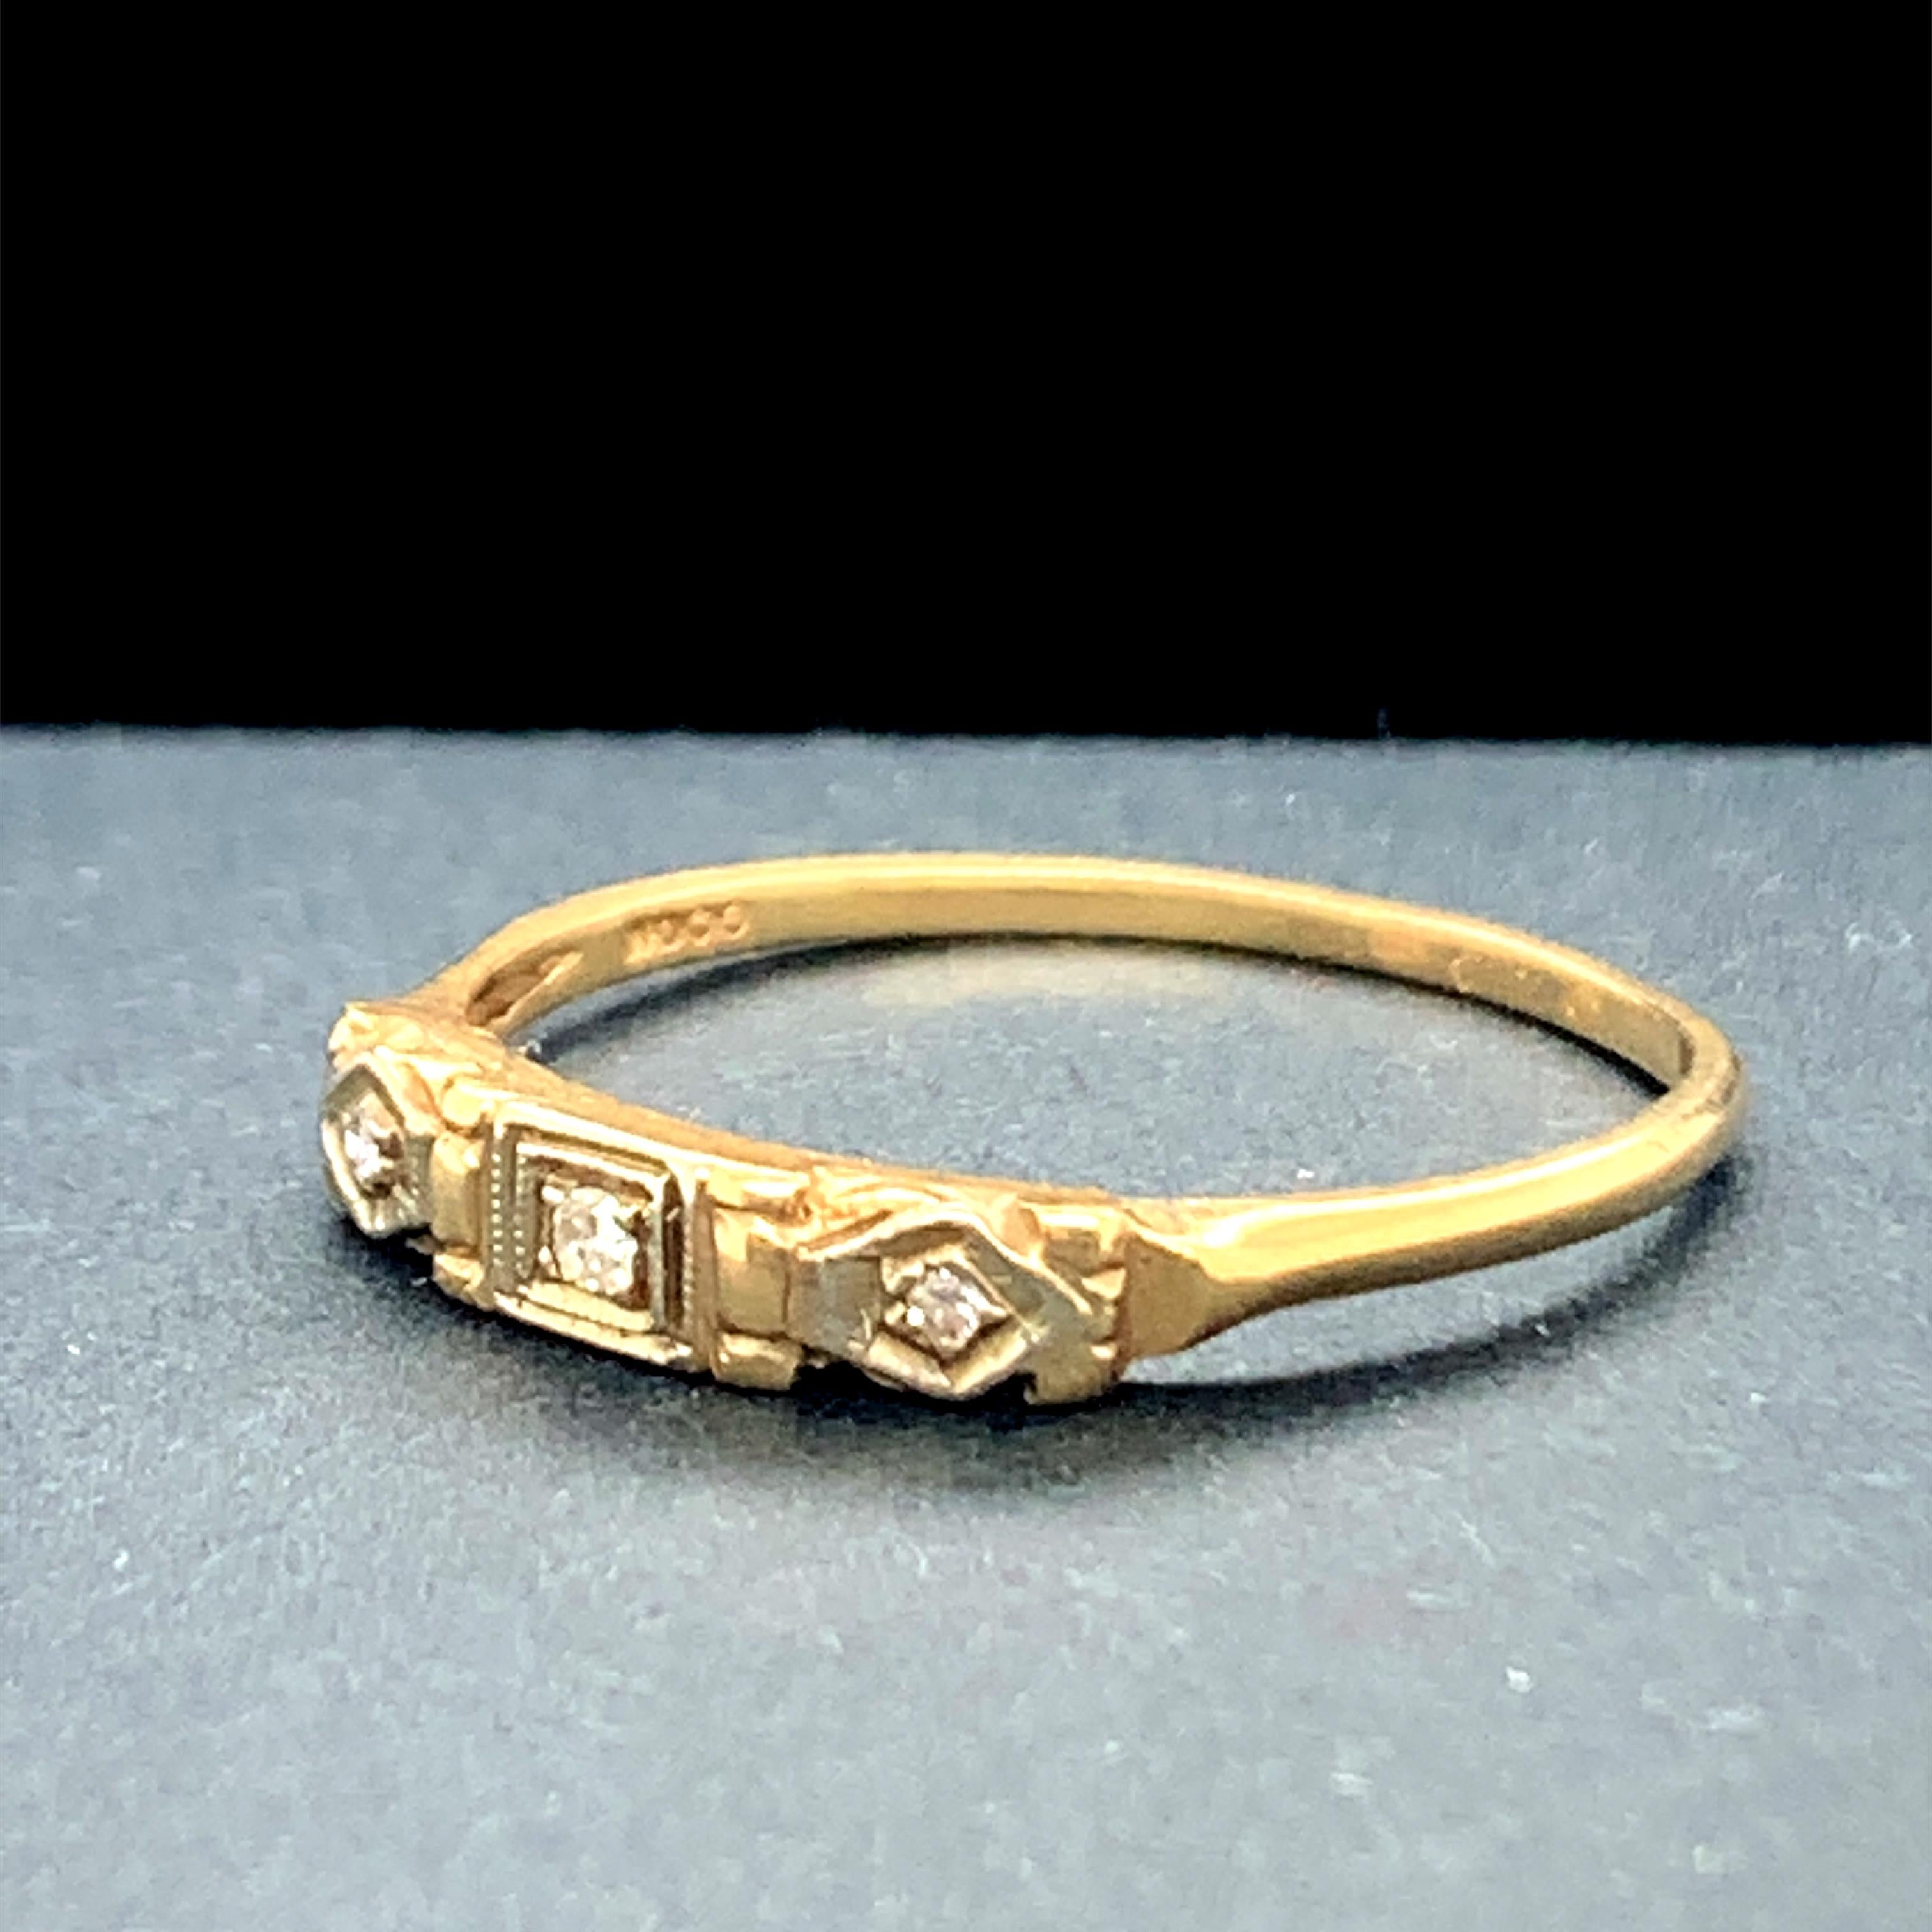 Year: 1930s

Item Details: 
Ring Size: 7
Metal Type: 14k Yellow Gold  [Hallmarked, and Tested]
Weight:  1.2 grams

Diamond Details:
Weight: ..06ct, total weight
Cut: Old European brilliant
Color: G
Clarity: VS

Finger to Top of Stone Measurement: